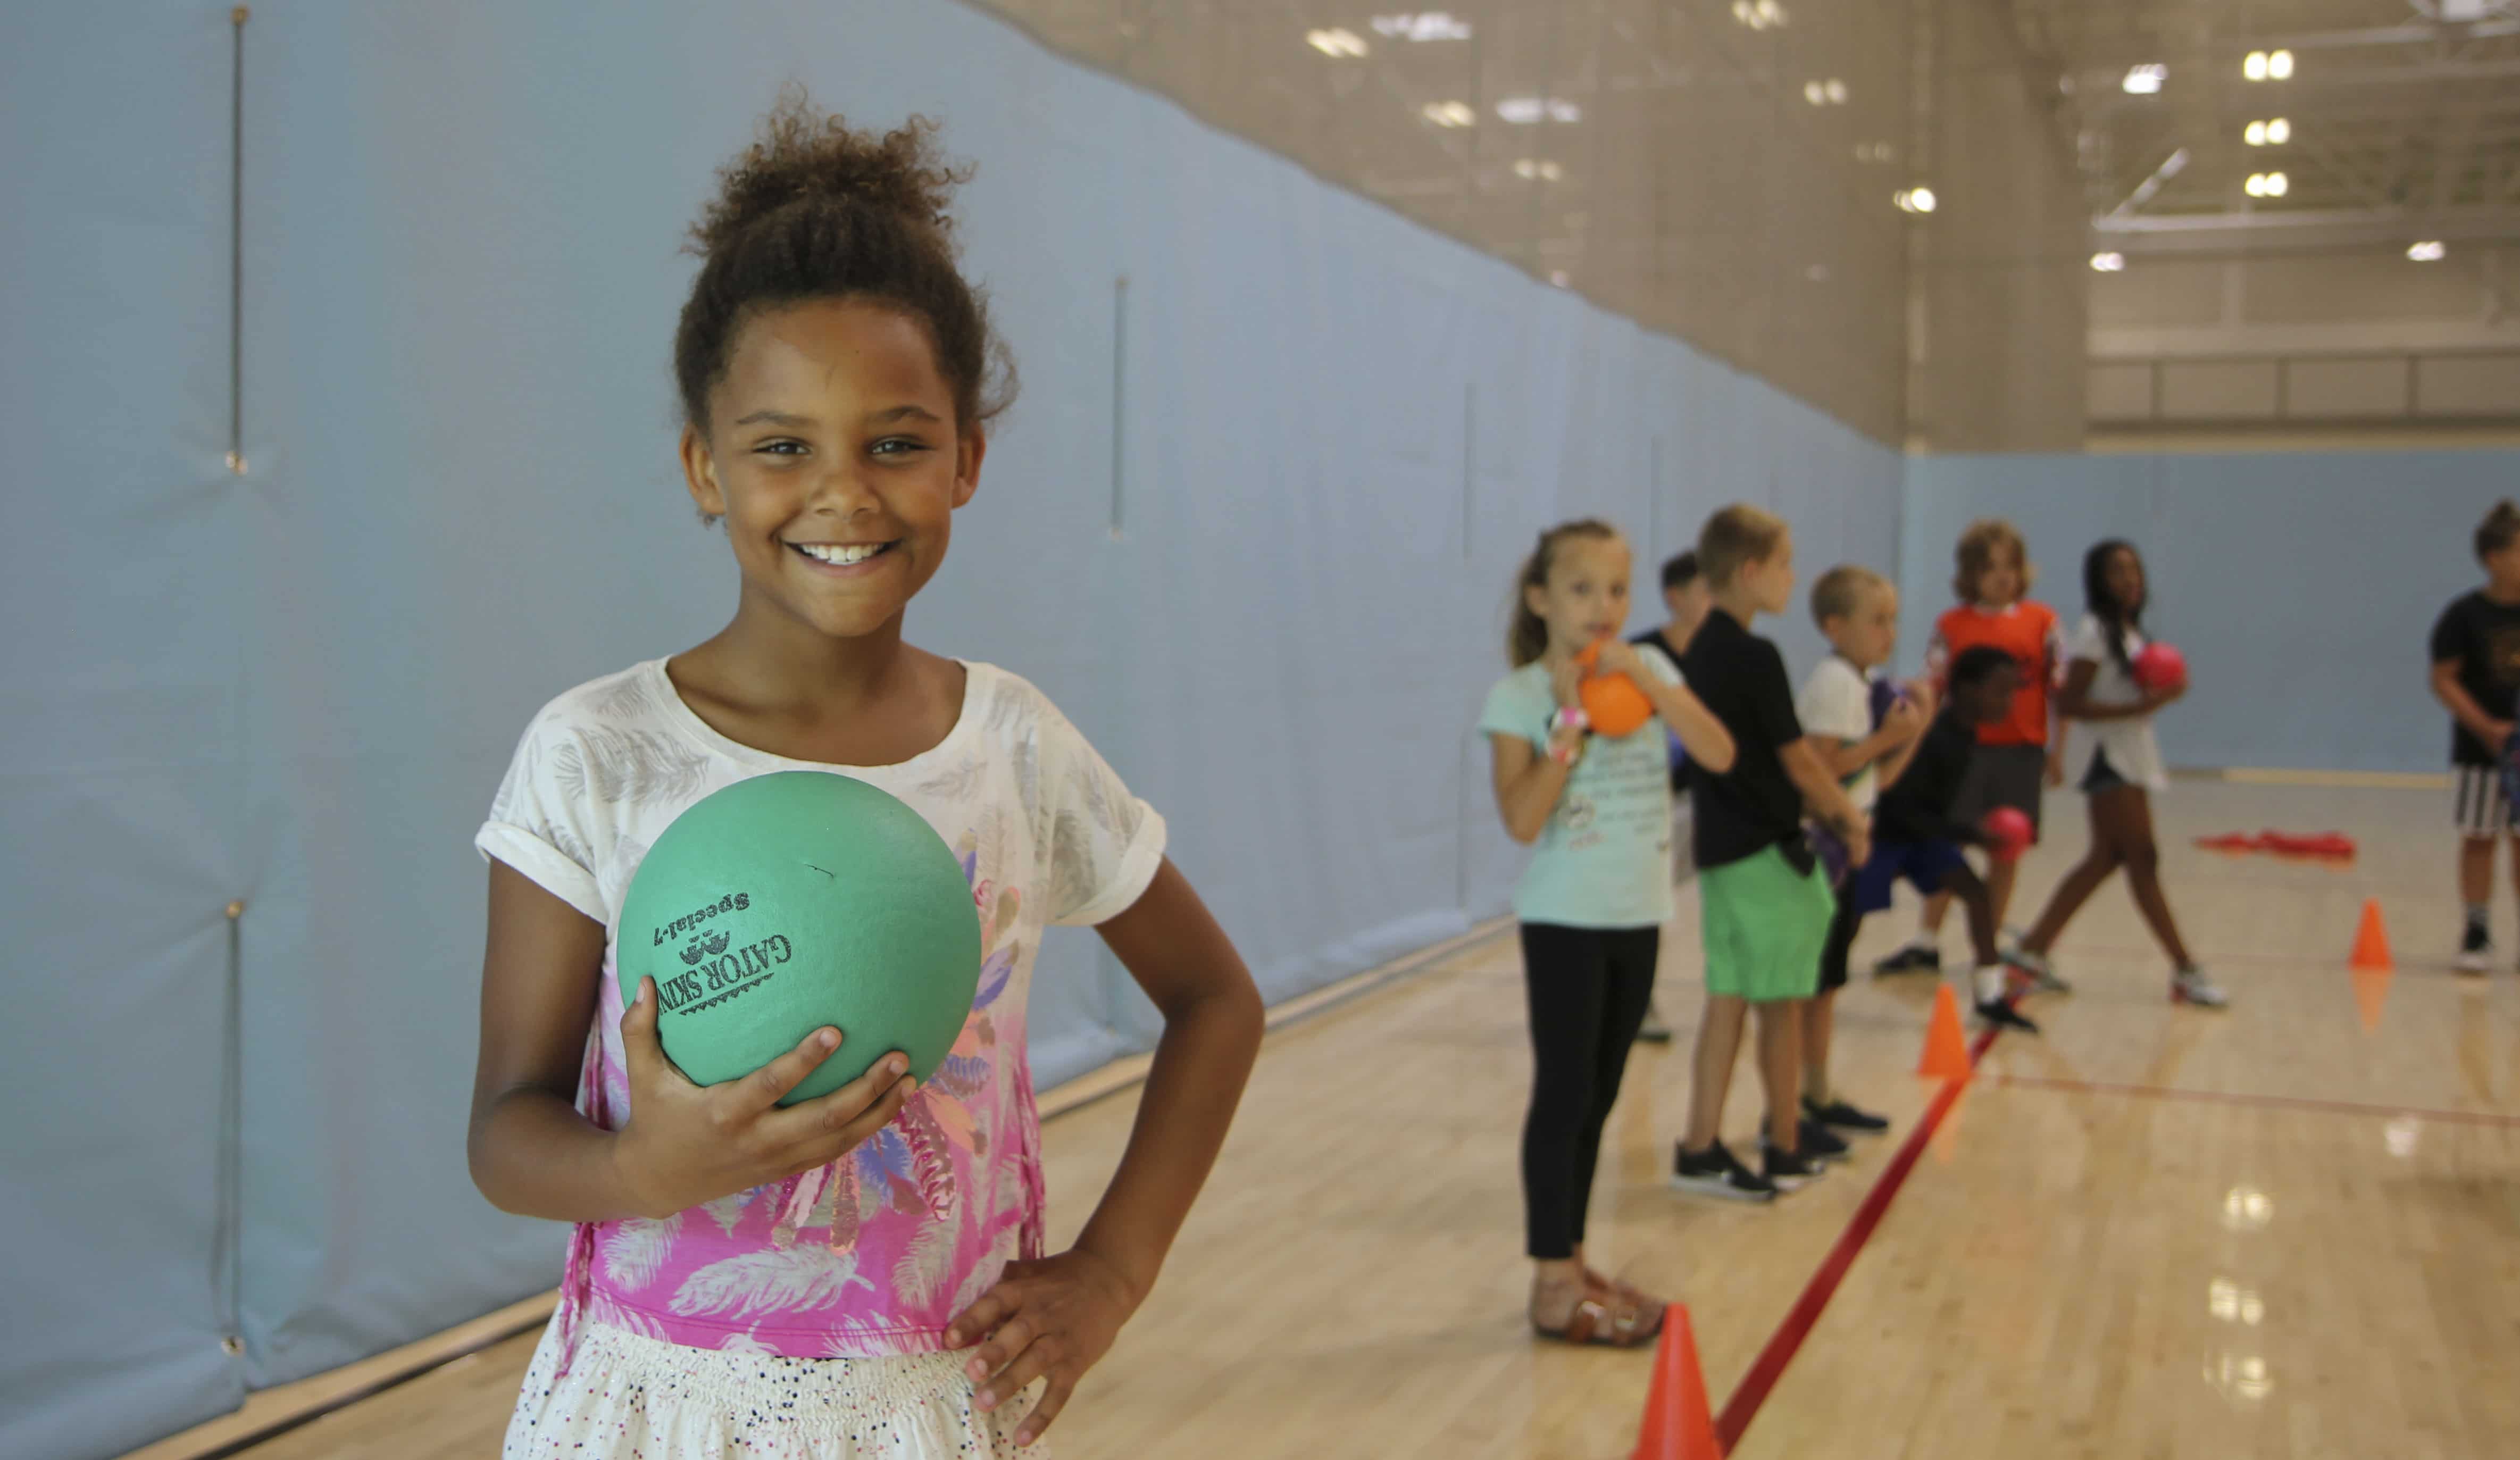 A child is holding a ball and smiling at the camera. There is a line of children behind her.